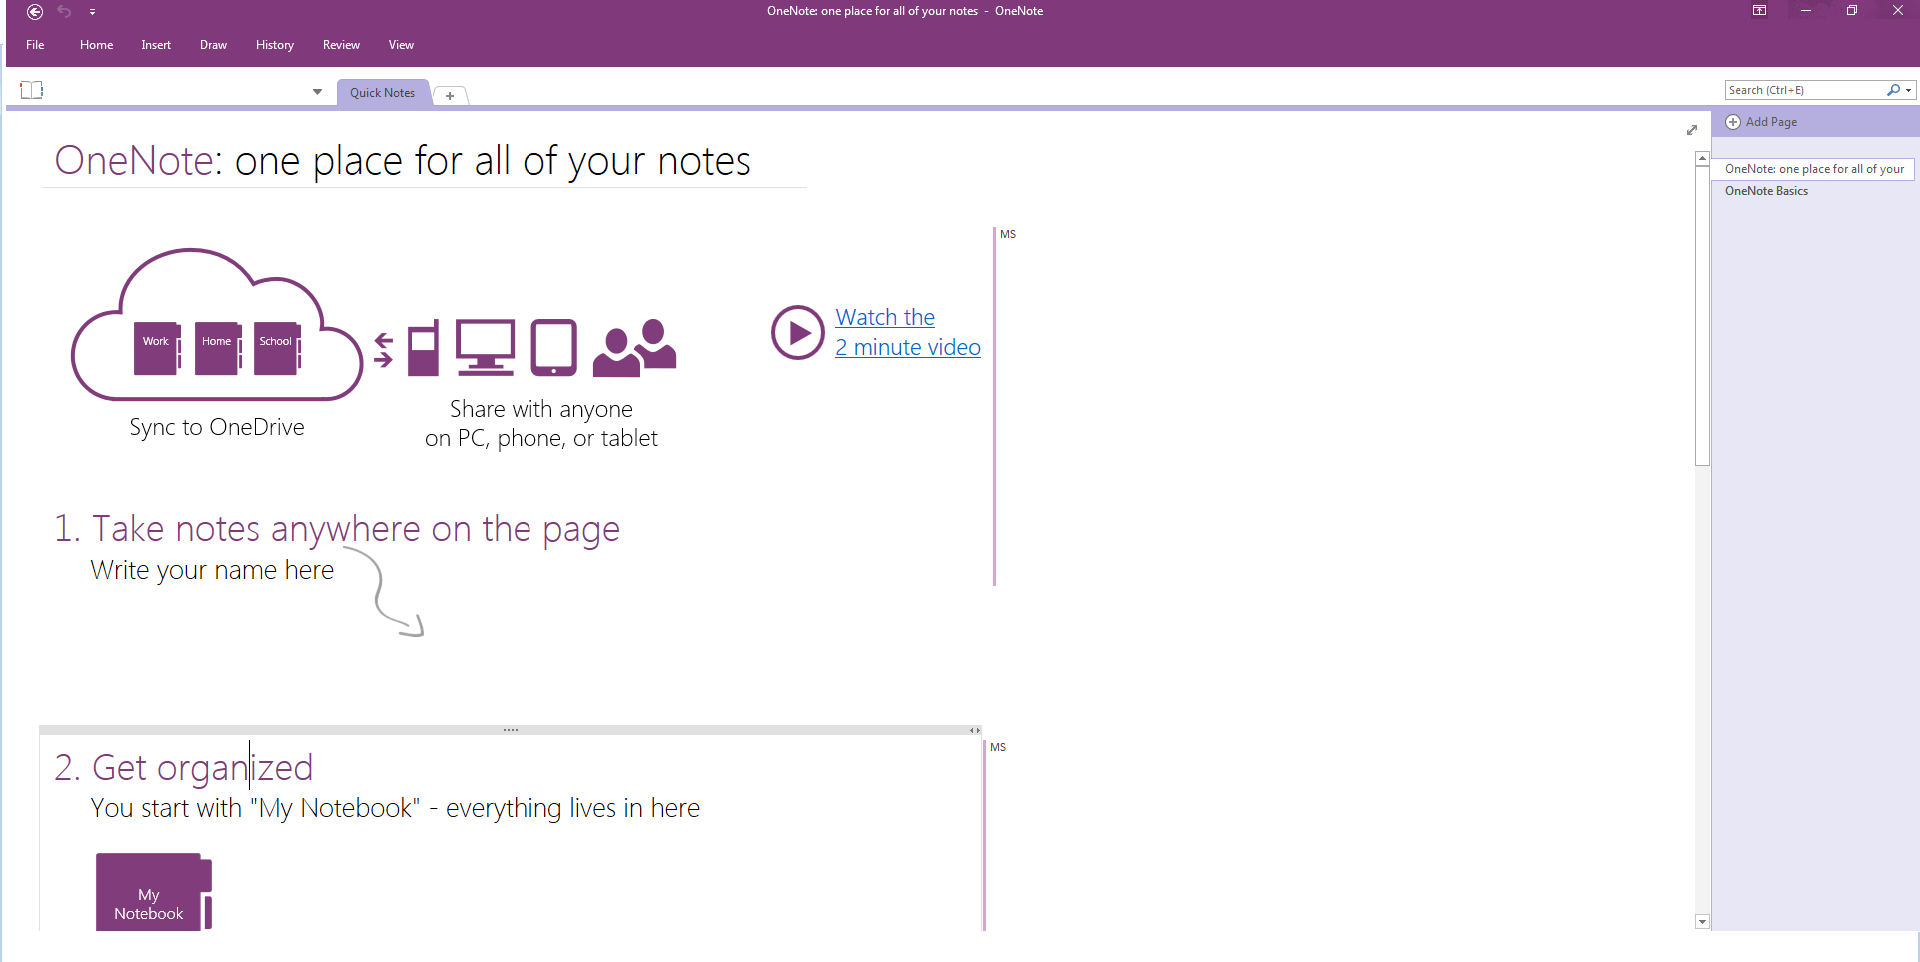 Excerpt from OneNote